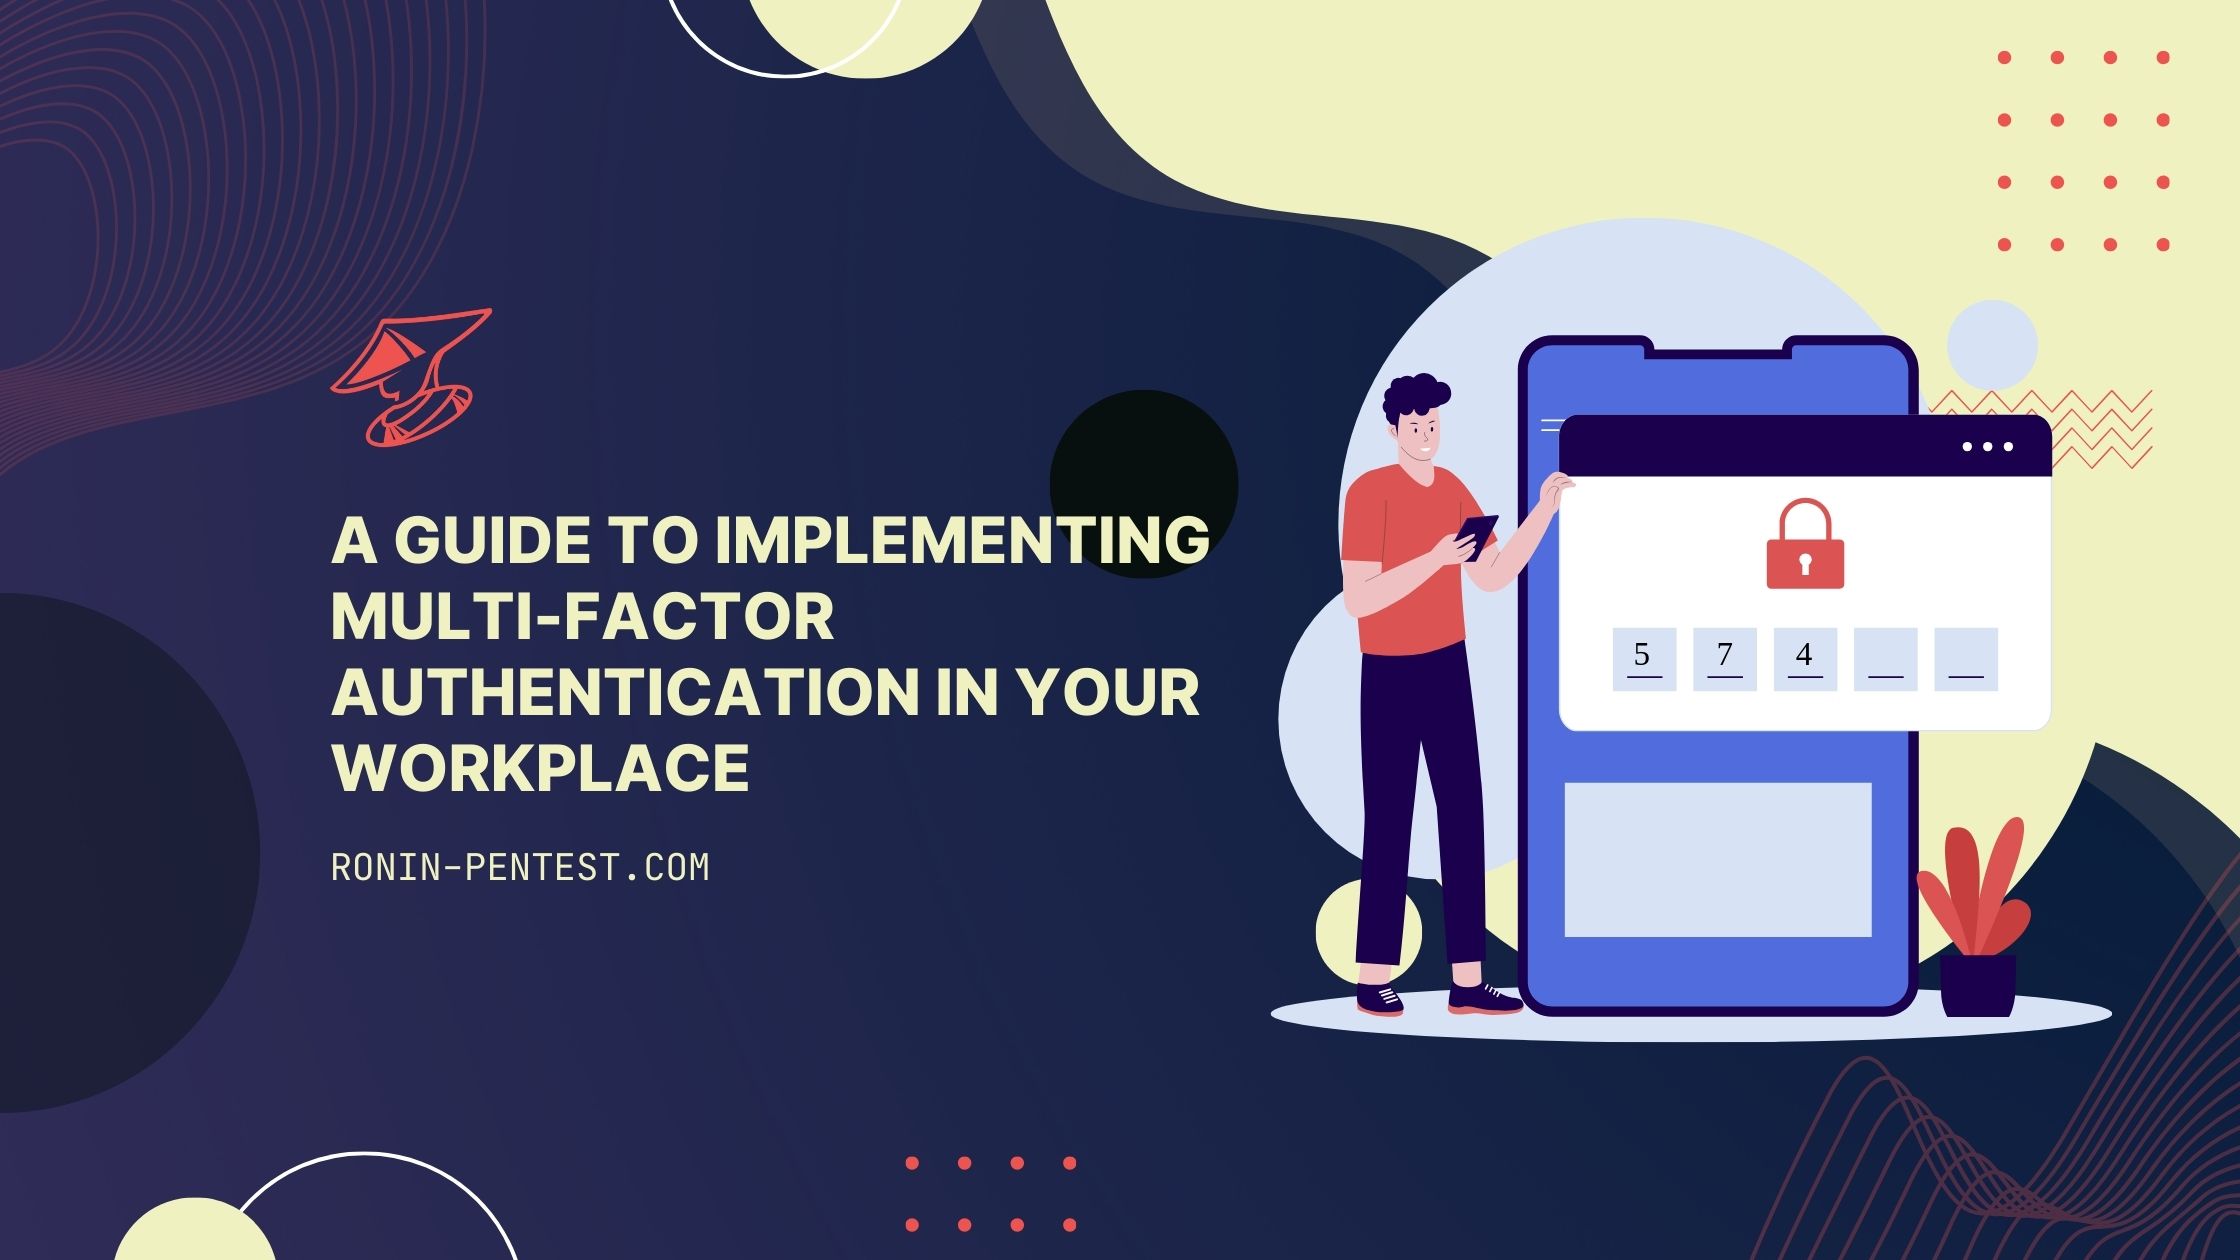 Ronin Pentest | {Strengthening Security: A Guide to Implementing Multi-Factor Authentication in Your Workplace}